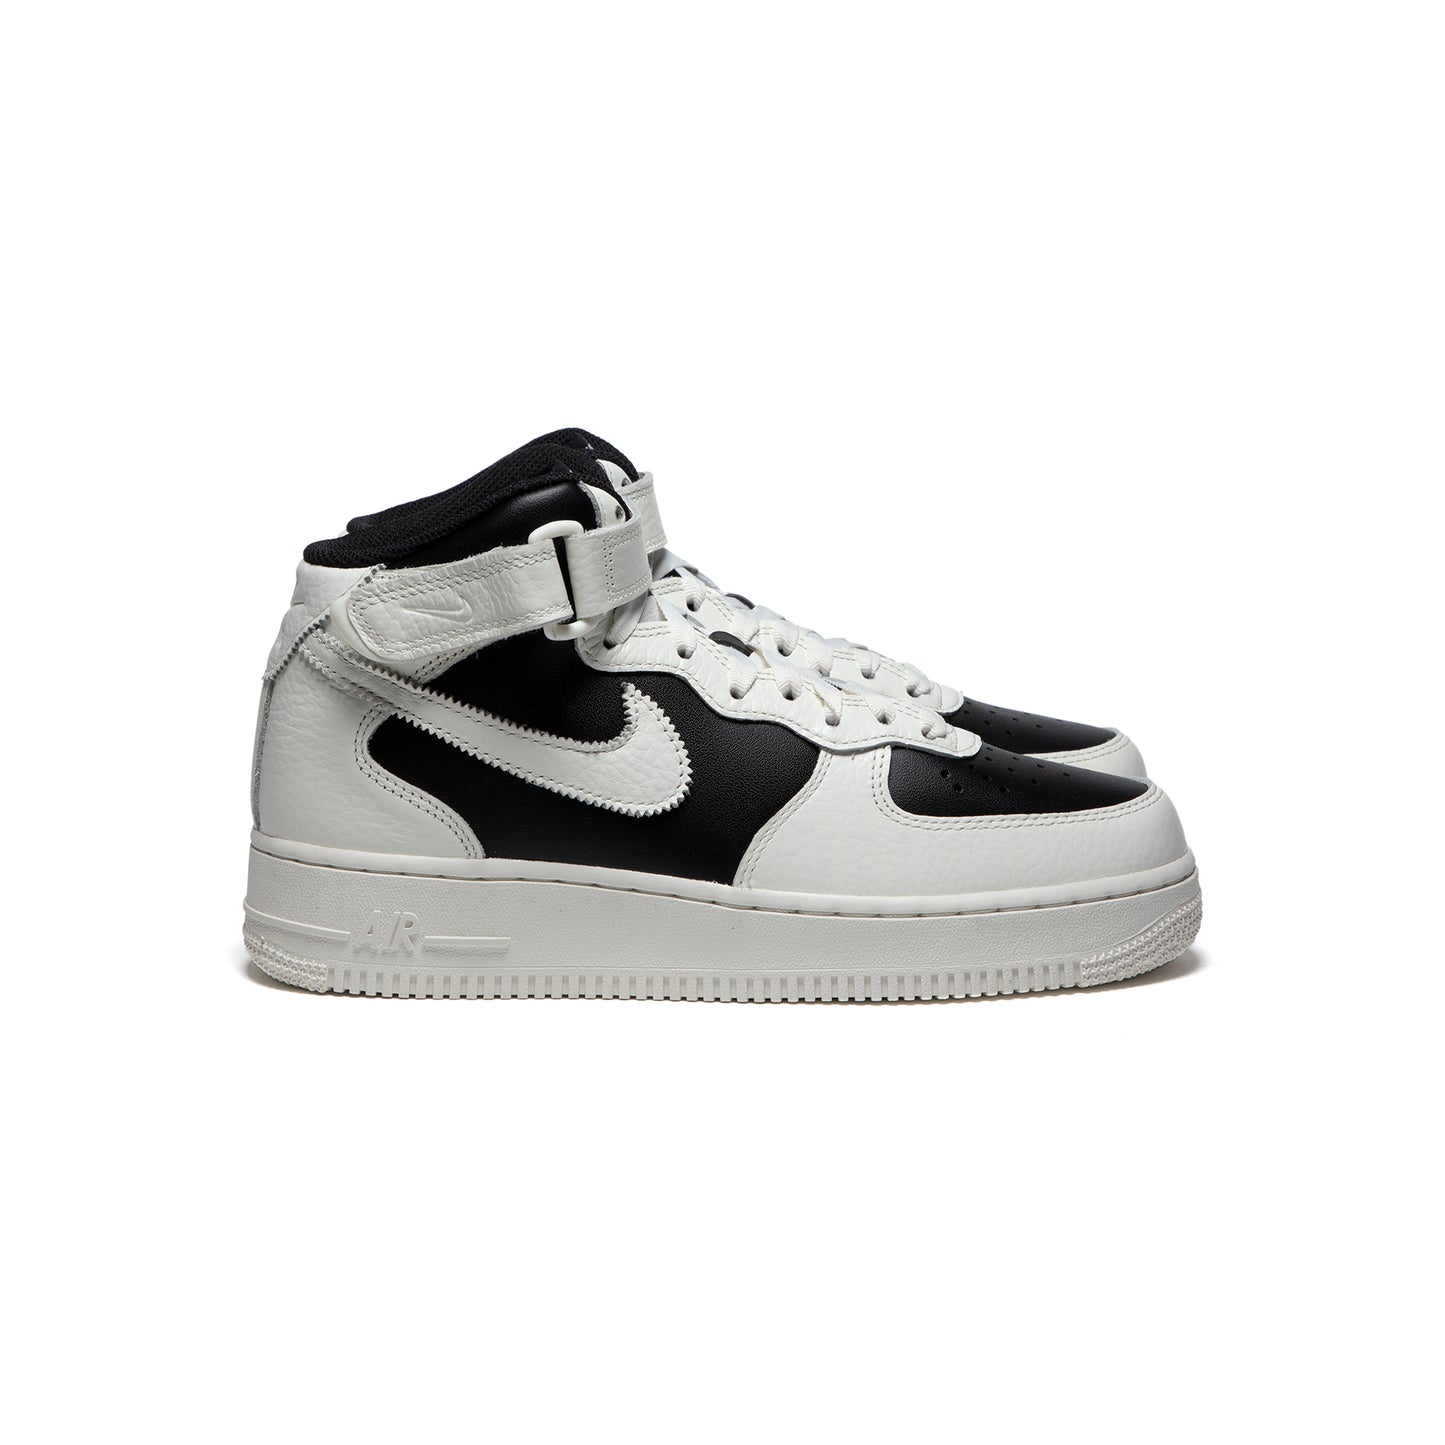 Nike Air Force 1 Mid '07 Lv8 'Black/Coconut Milk-Light Silver' The